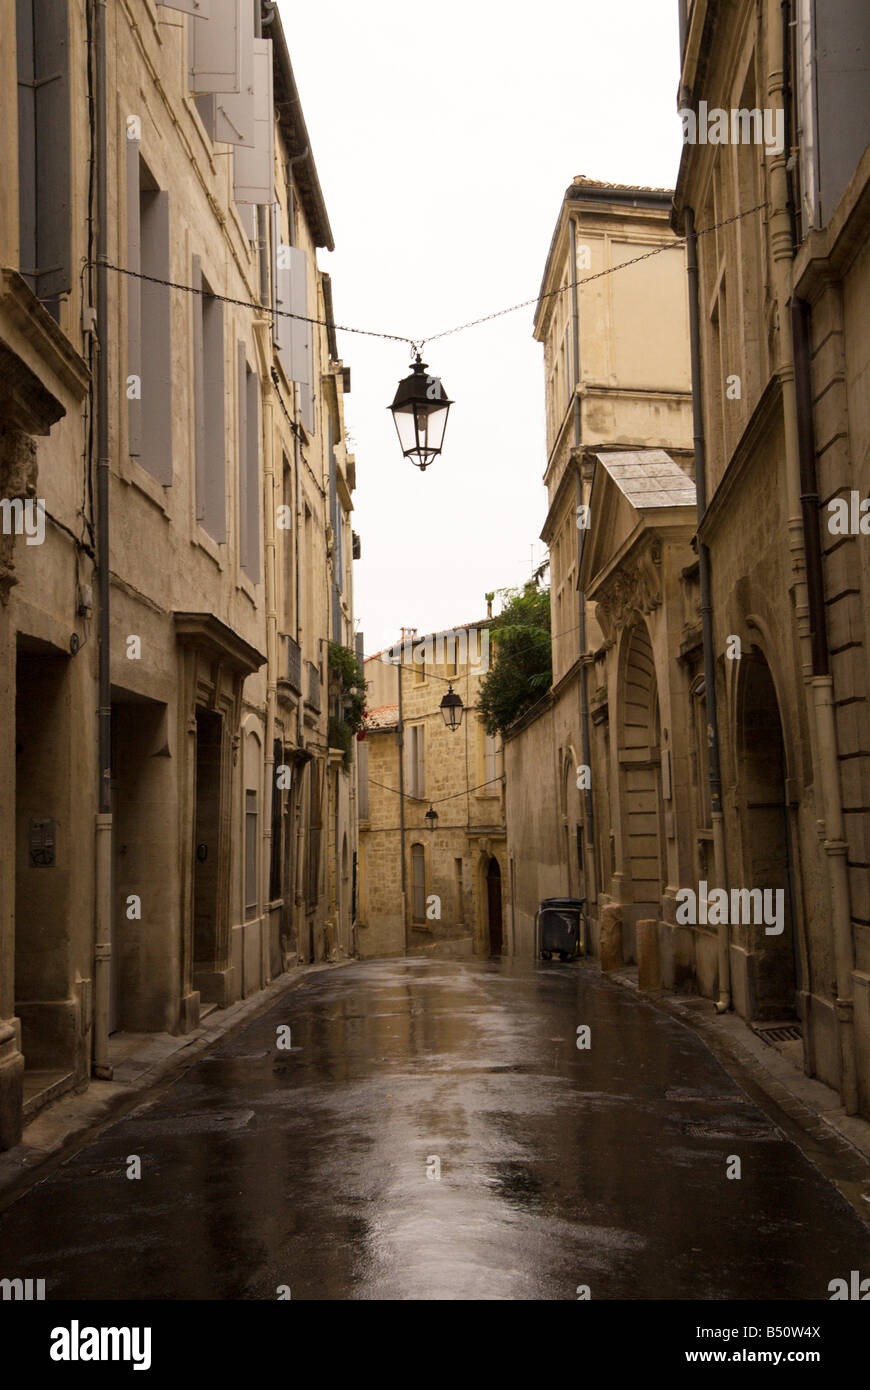 A street in the old city on a rainy day Montpellier France, October 8 2008 Stock Photo